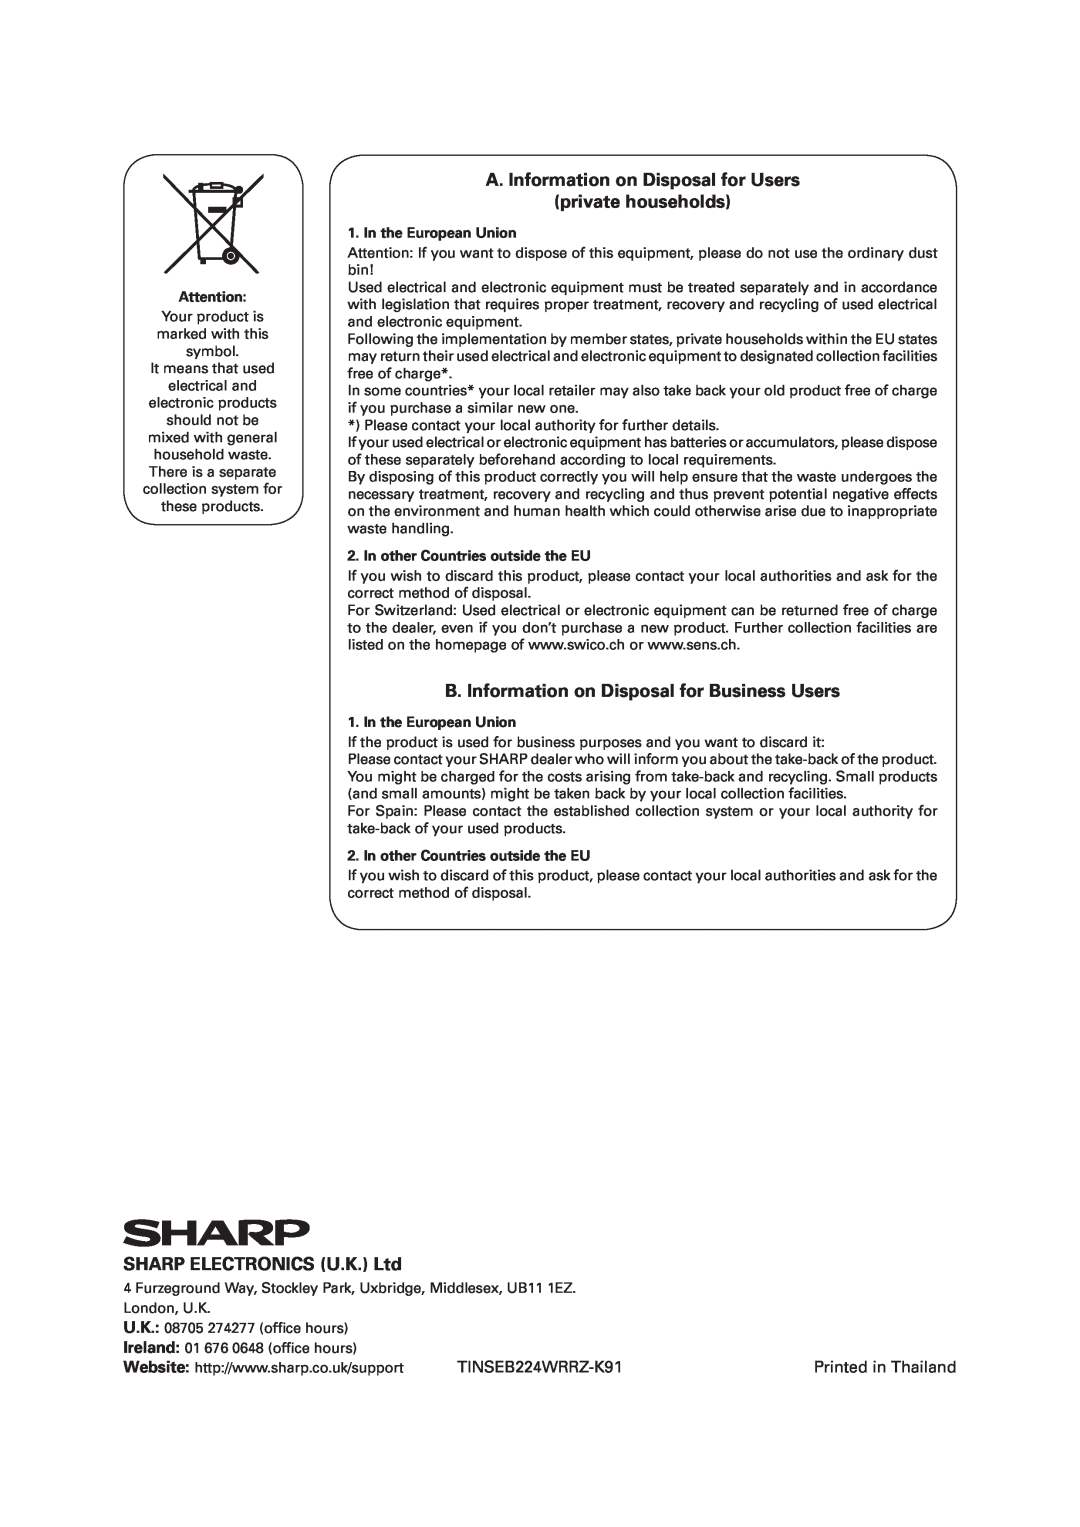 Sharp R-1900M A. Information on Disposal for Users, private households, B. Information on Disposal for Business Users 